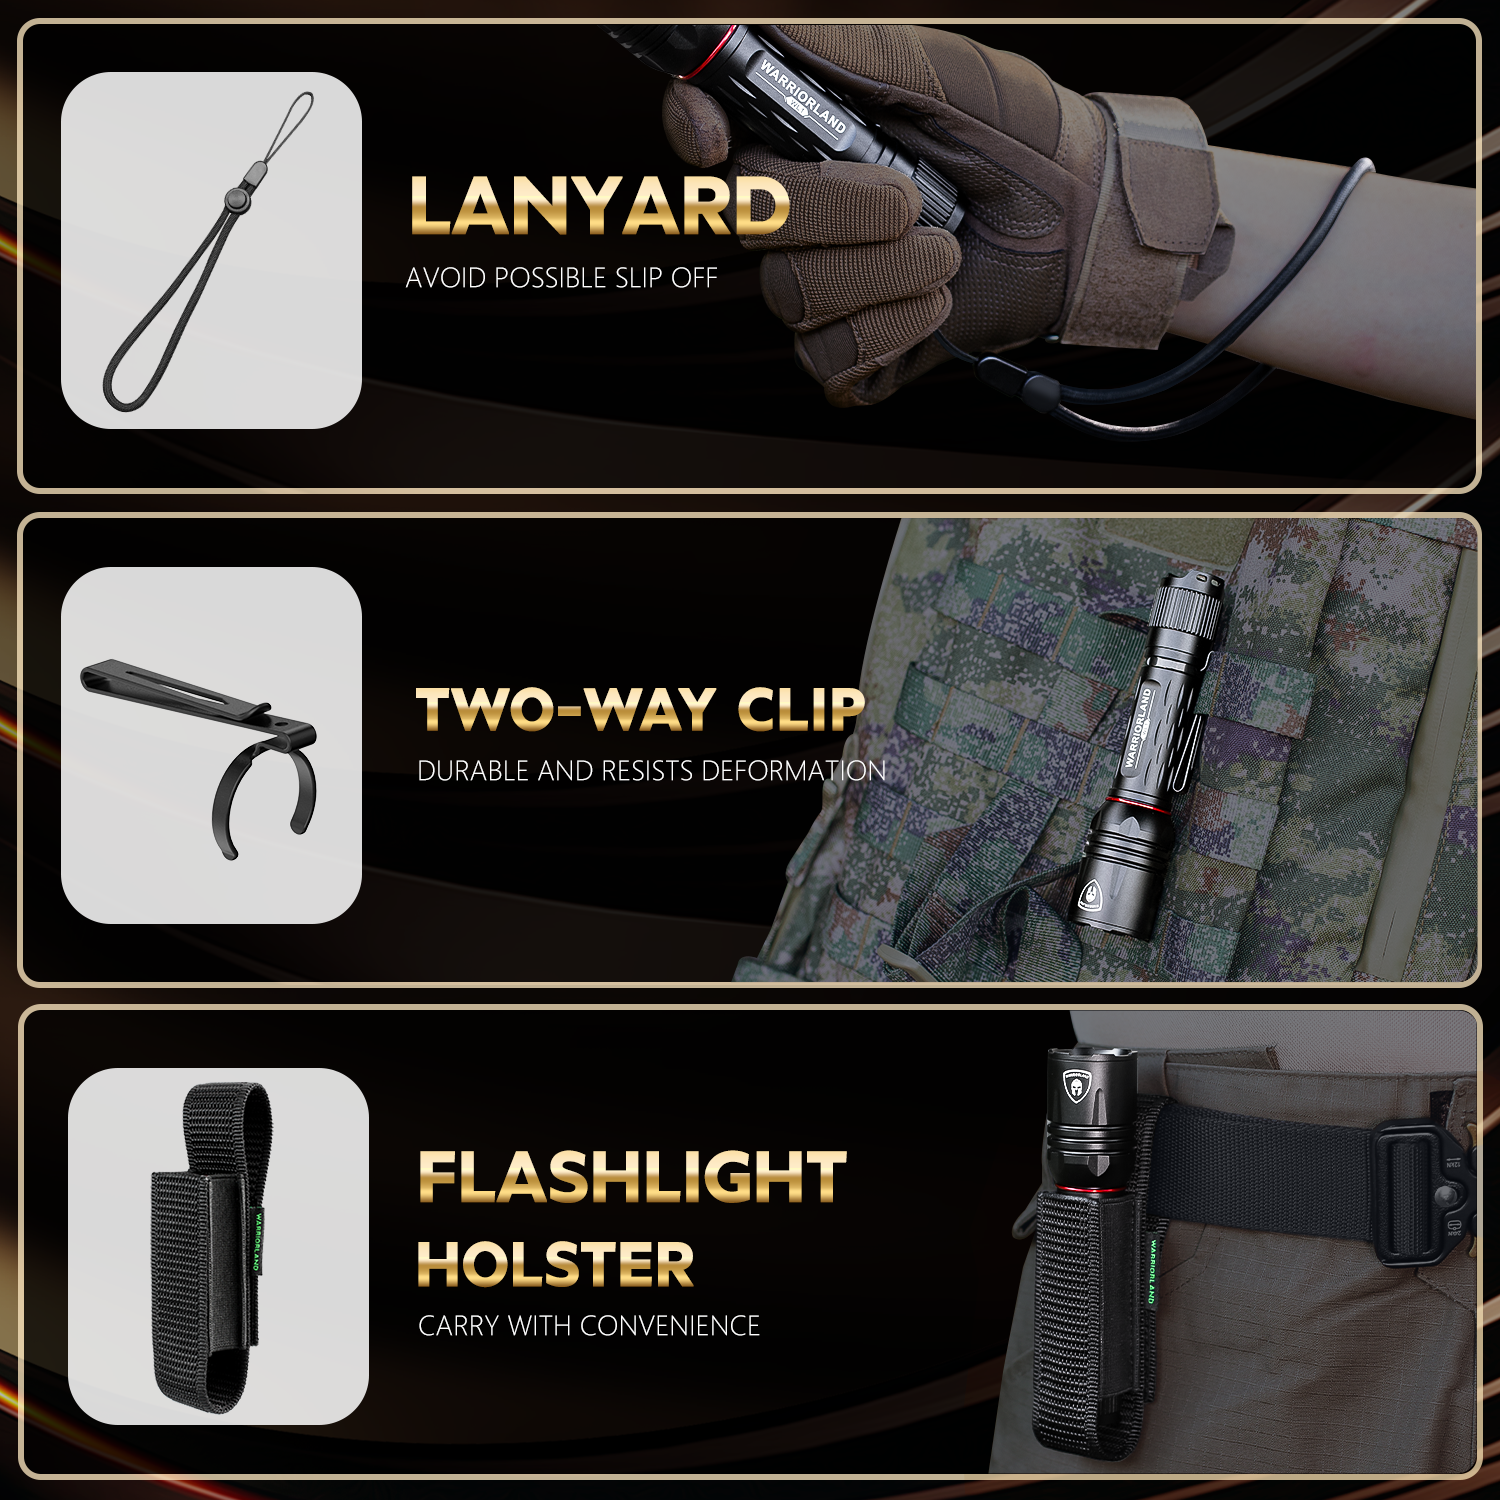 1600 Lumen Tactical Flashlight, Compact Handheld Flashlight with Max Beam Distance 473 Meters, IP68, EDC Flashlight with Rechargeable Battery, Outdoor, Camping and Emergency|WARRIORLAND